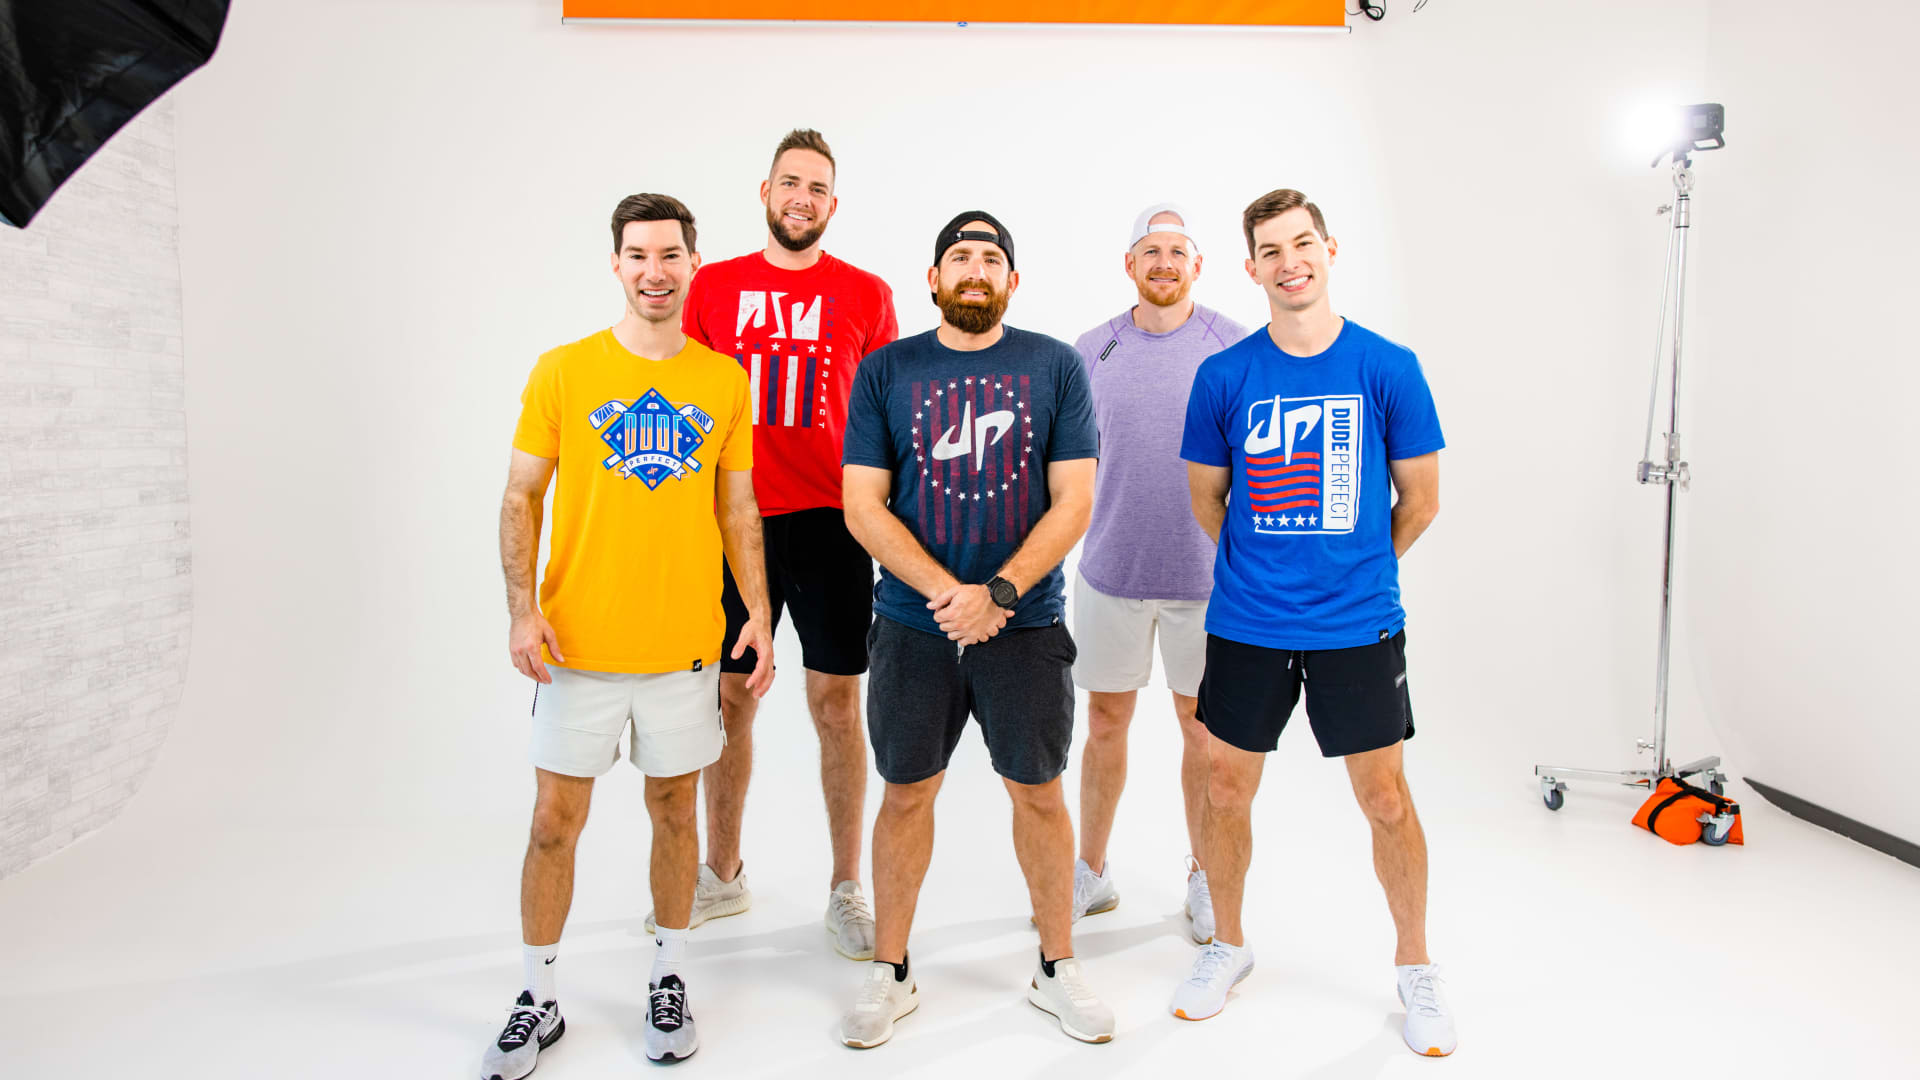 Popular YouTube channel Dude Perfect scores more than $100 million investment